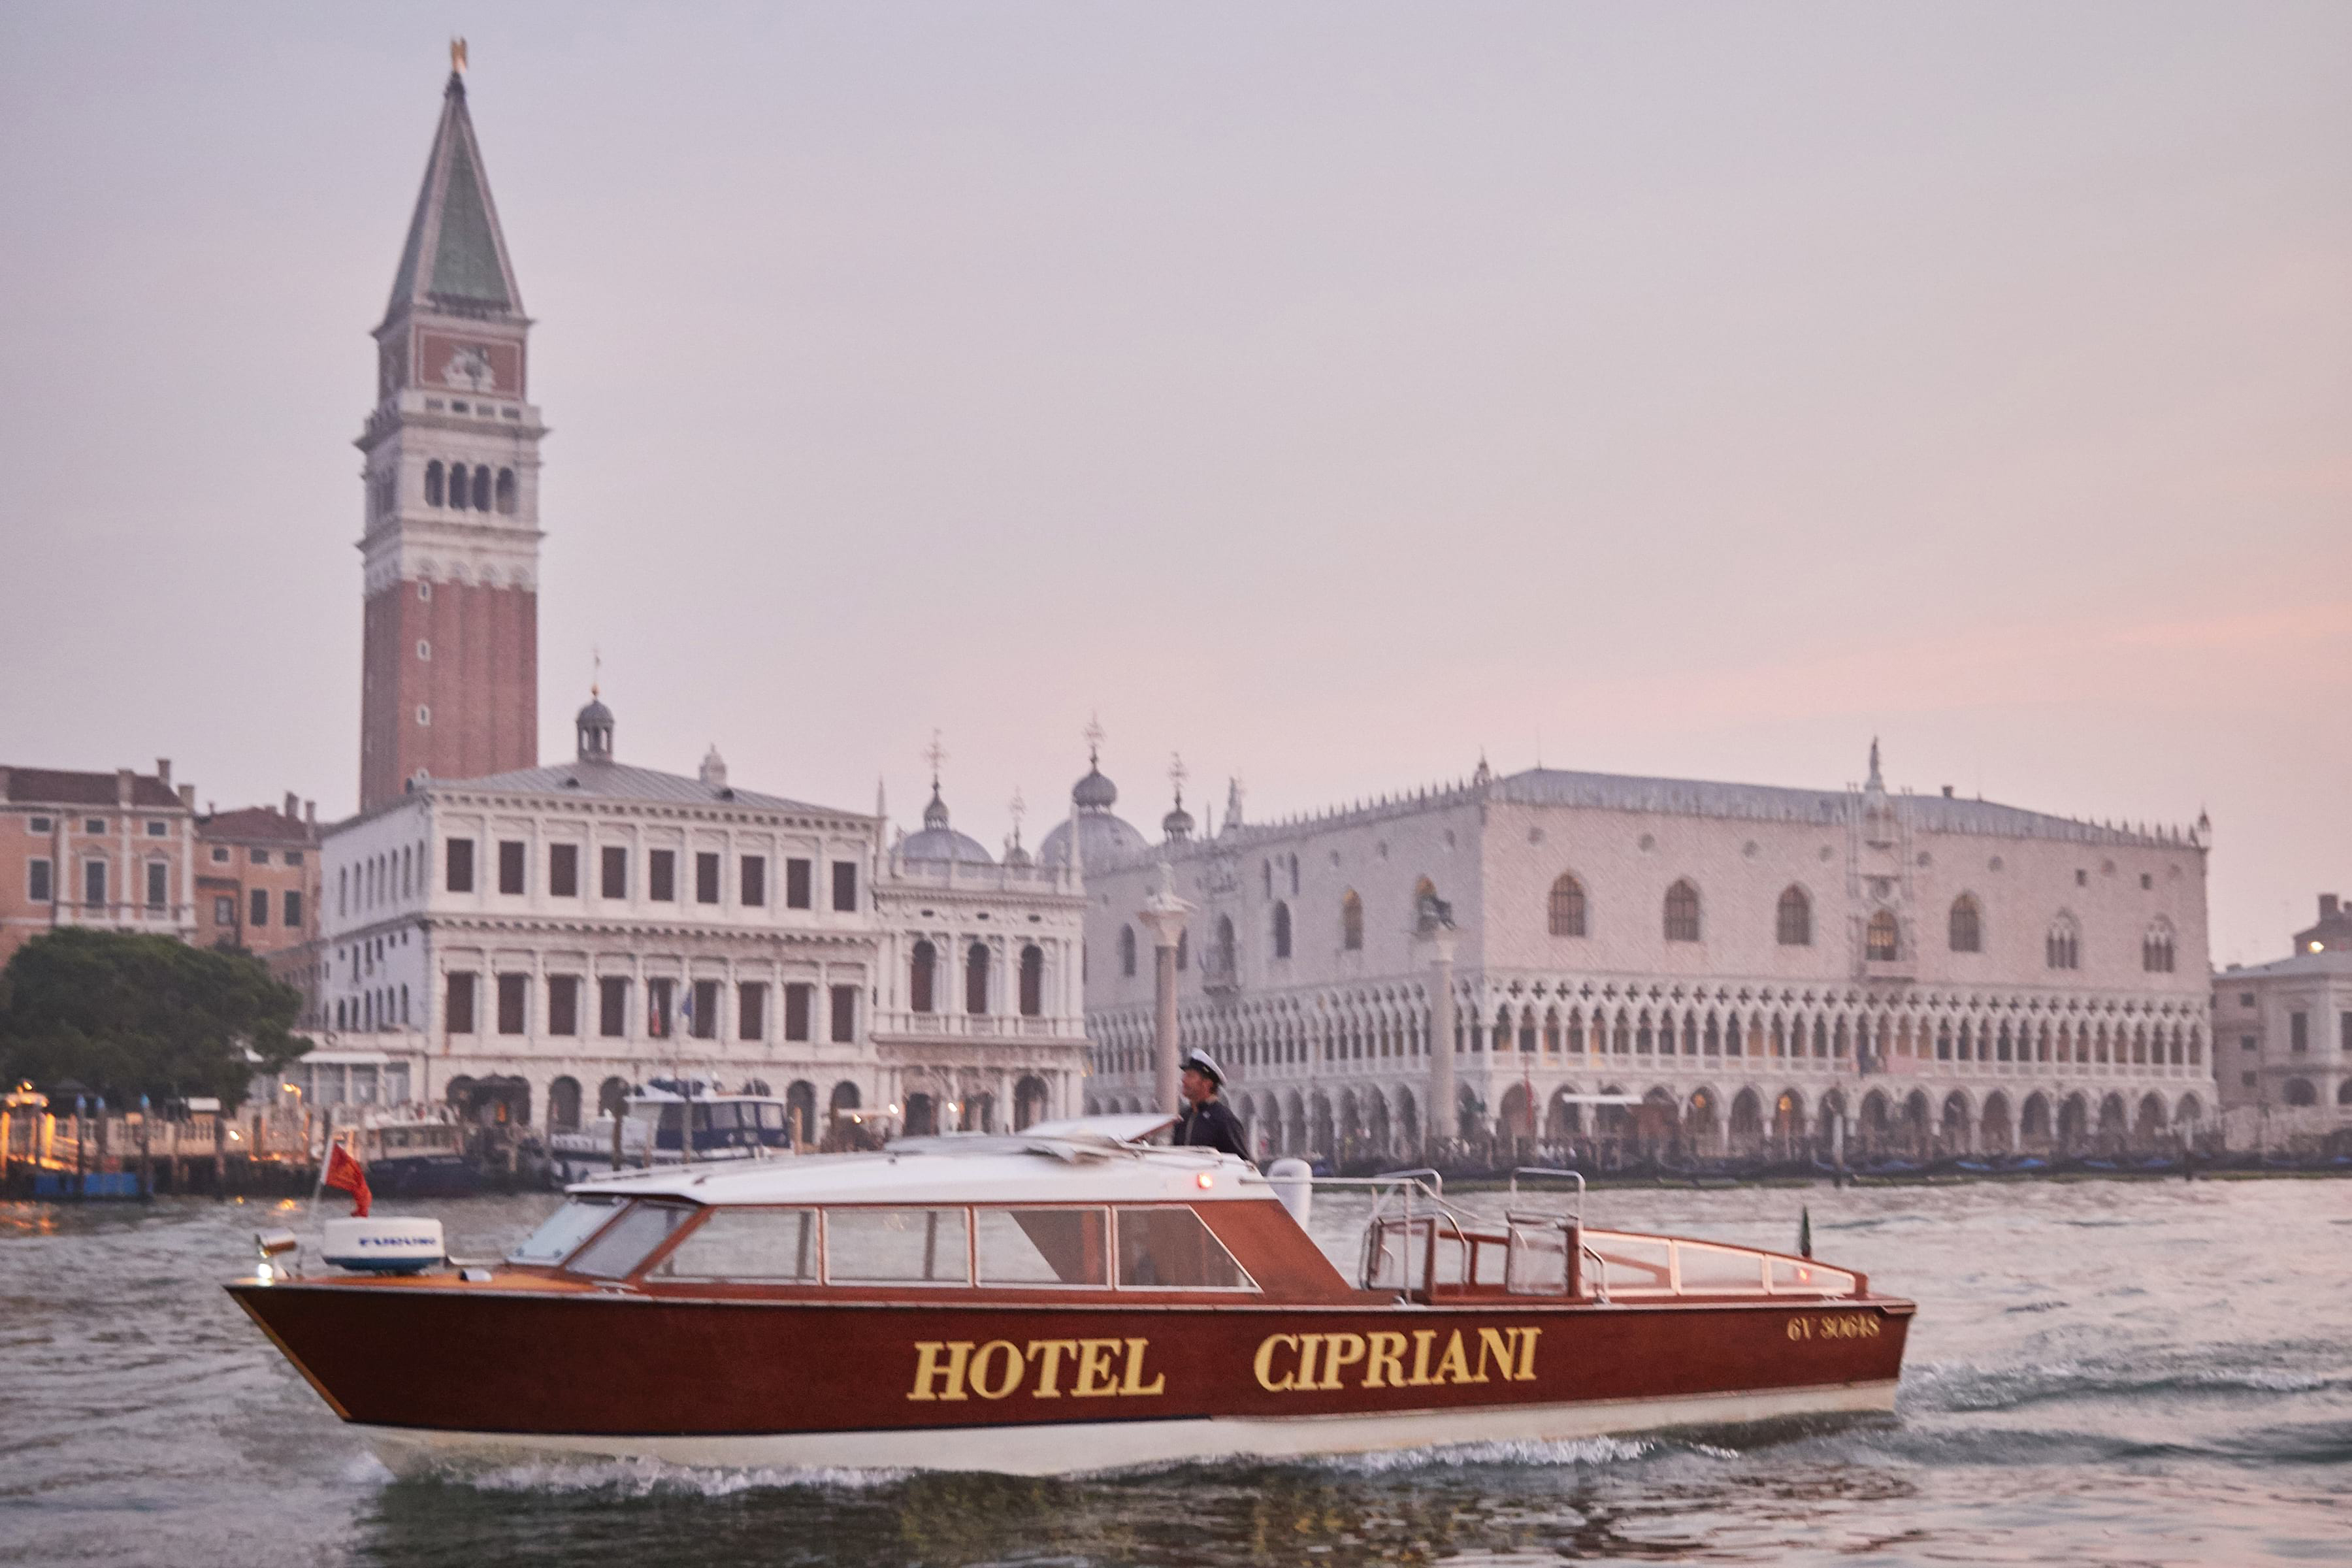 The Hotel Cipriani's water taxi in Venice